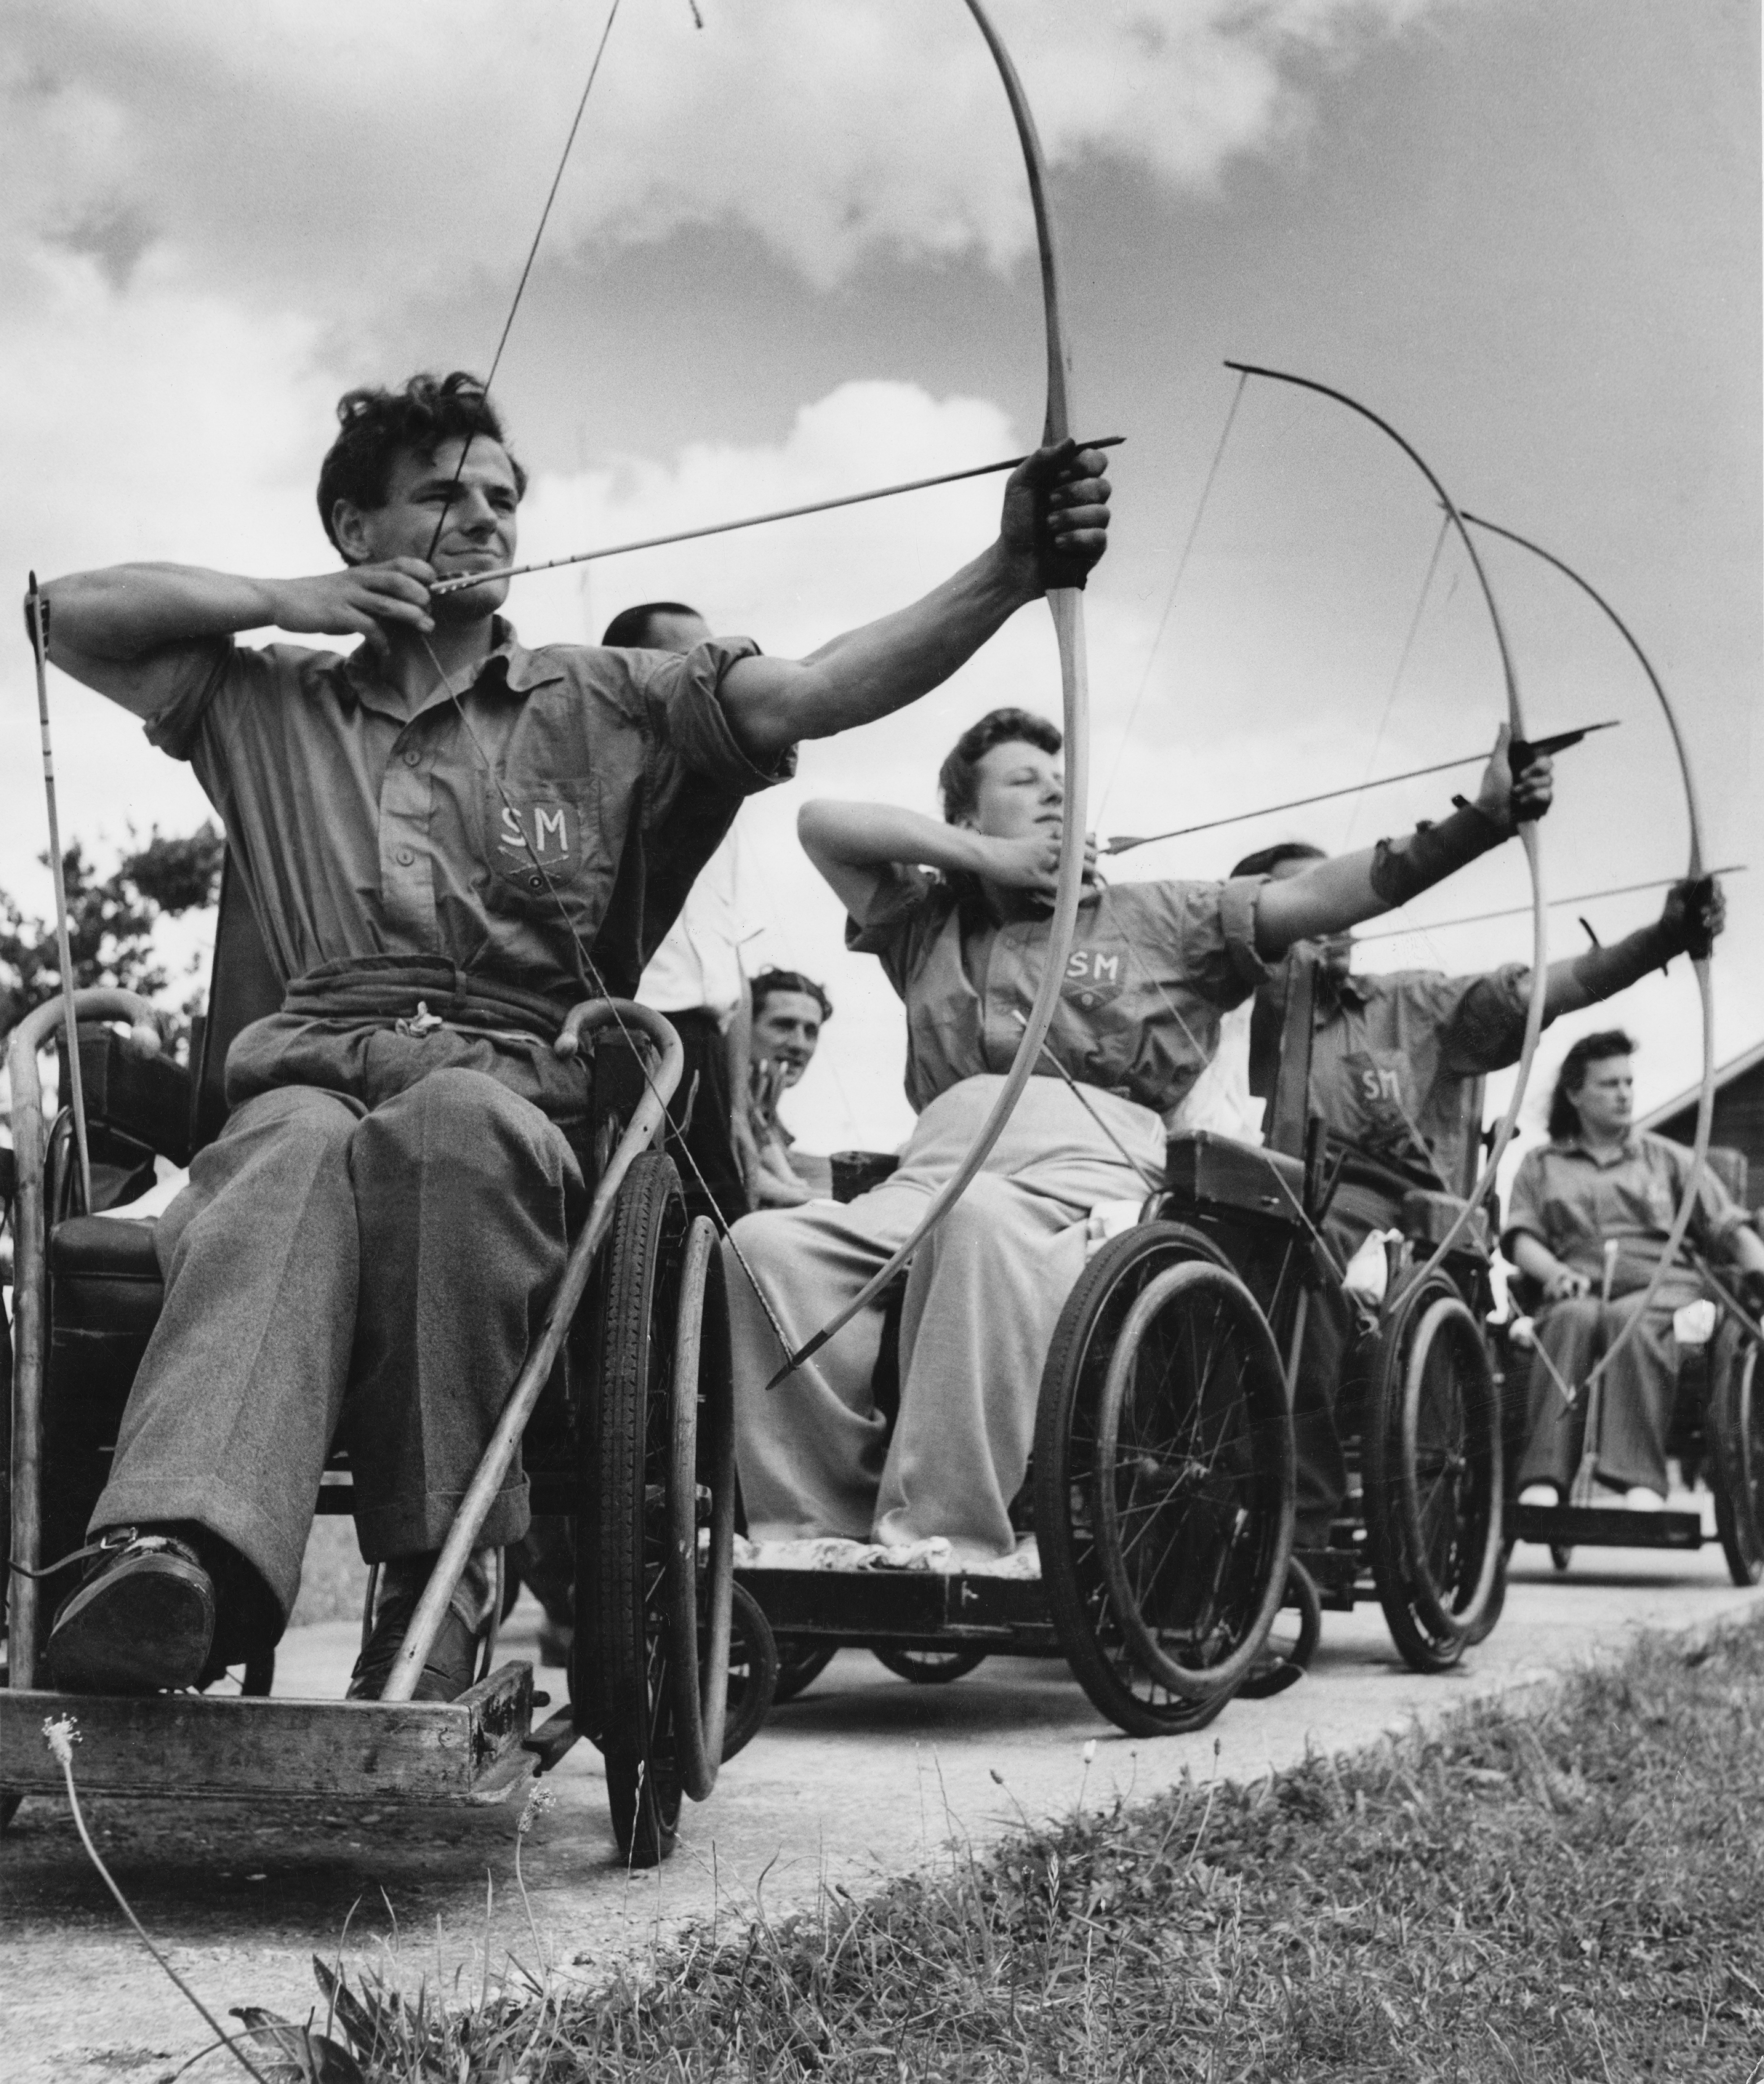 An archery class at the Ministry of Pensions Spinal Centre at Stoke Mandeville Hospital, Buckinghamshire, UK, 1949. (Raymond Kleboe/Picture Post—Getty Images)